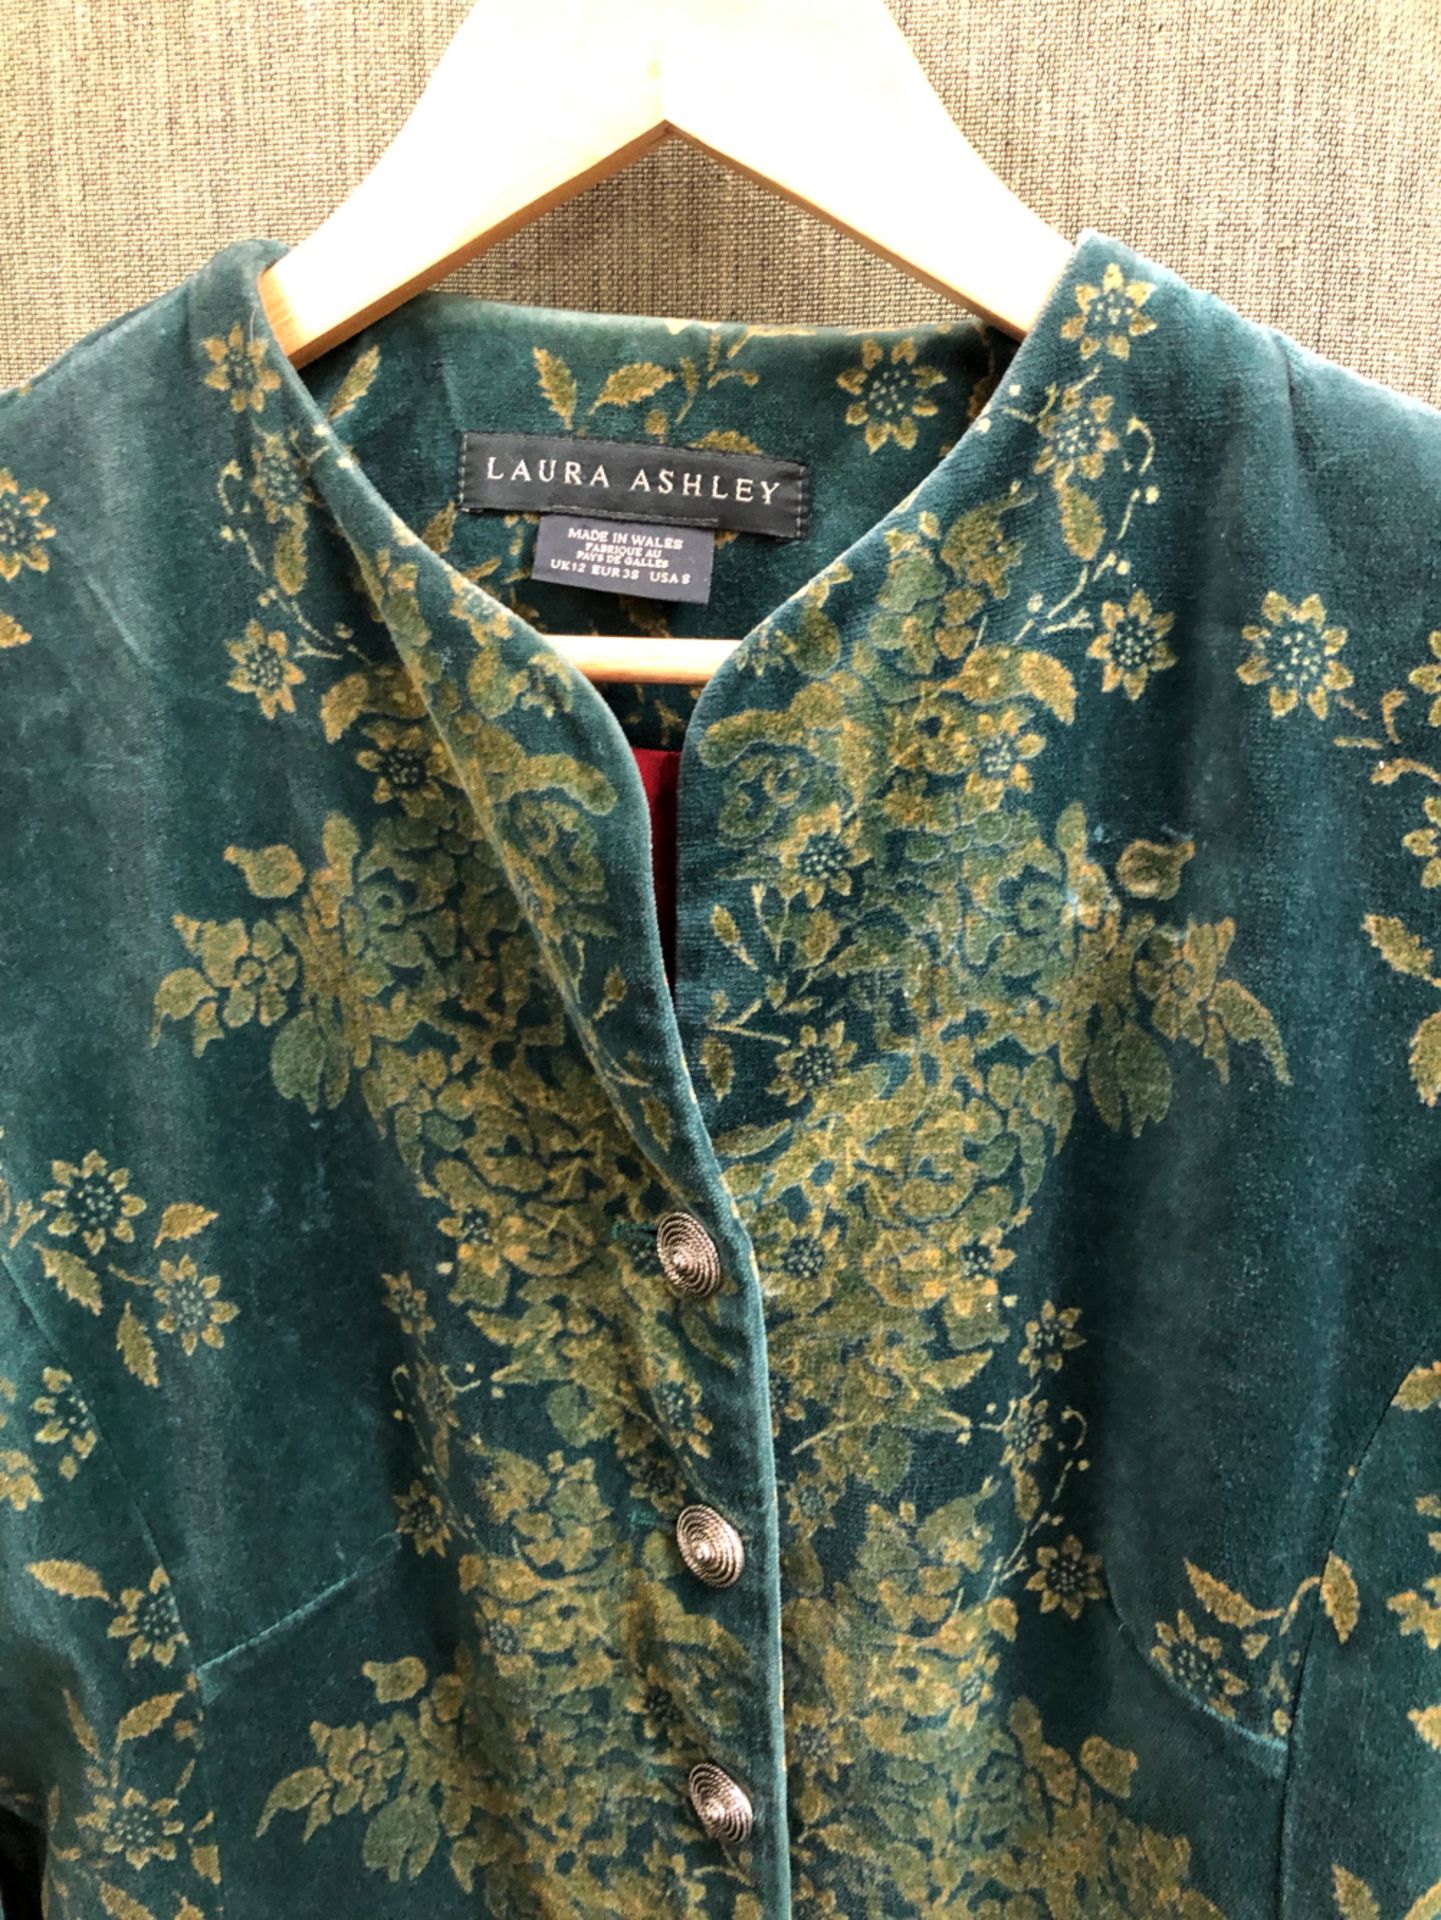 A LAURA ASHLEY GREEN JACKET WITH FLORAL DESIGN UK SIZE 12, TOGETHER WITH A LAURA ASHLEY FLORAL DRESS - Image 3 of 12